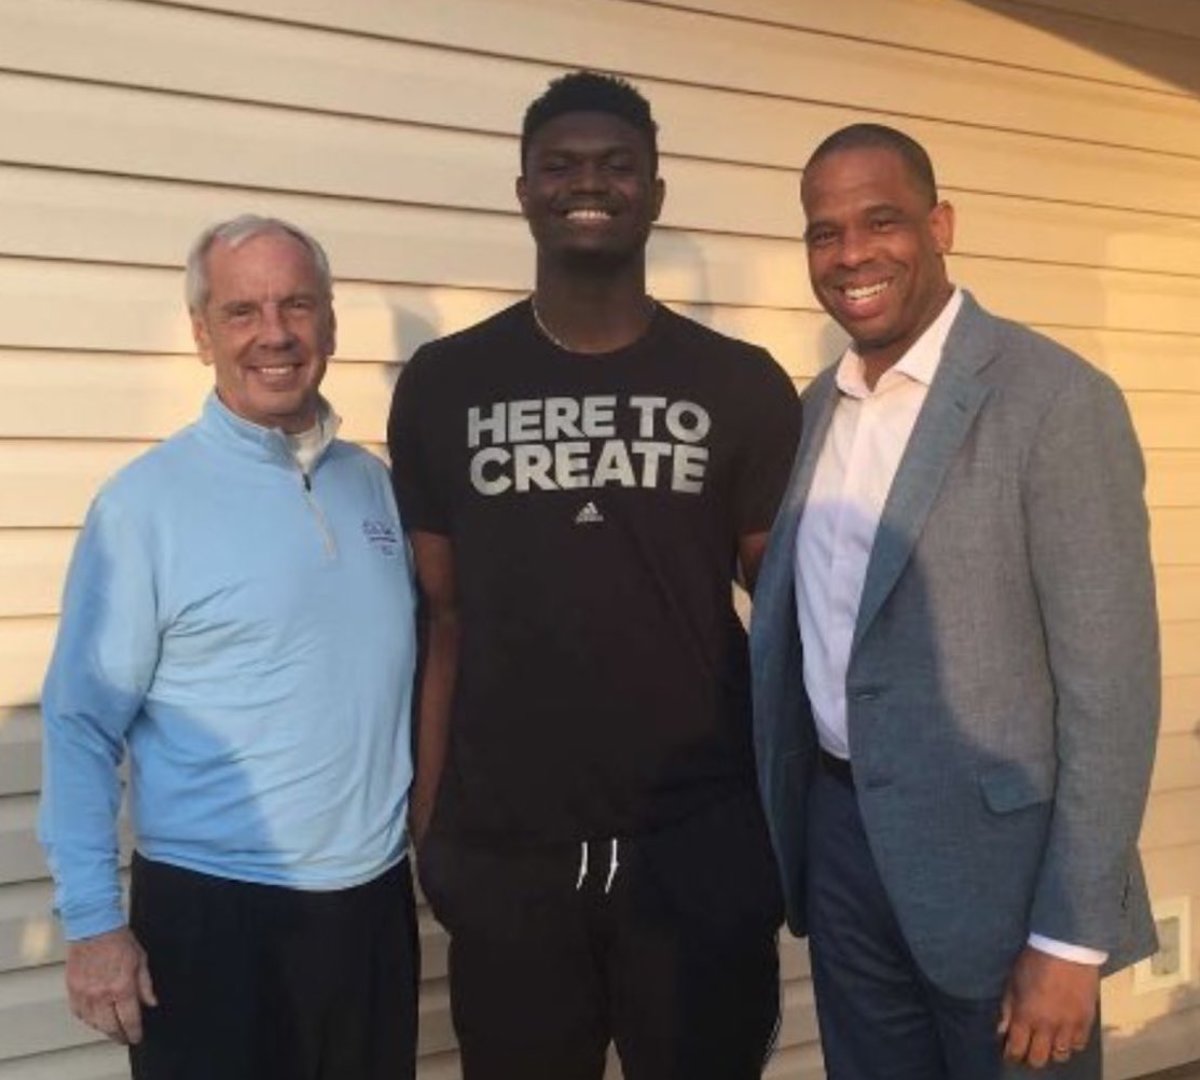 UNC Basketball: Roy Williams on His Recruitment Visit with Zion ...